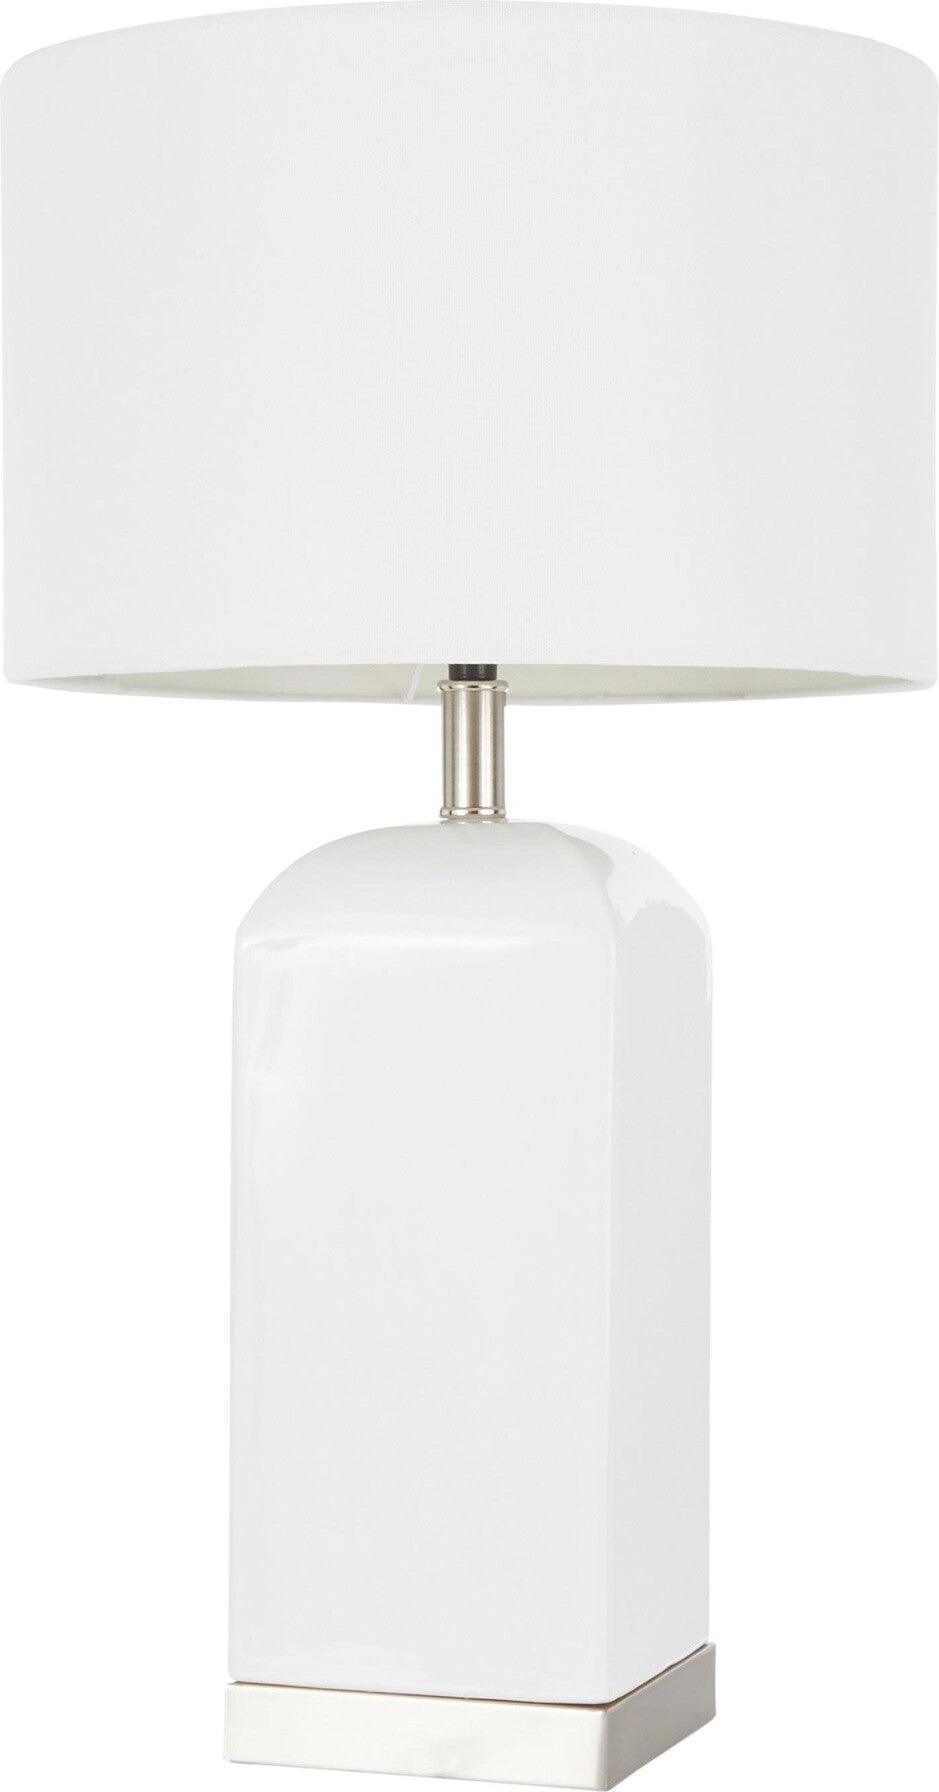 Lumisource Table Lamps - Carmen Table Lamp Stainless Steel & White Ceramic & White